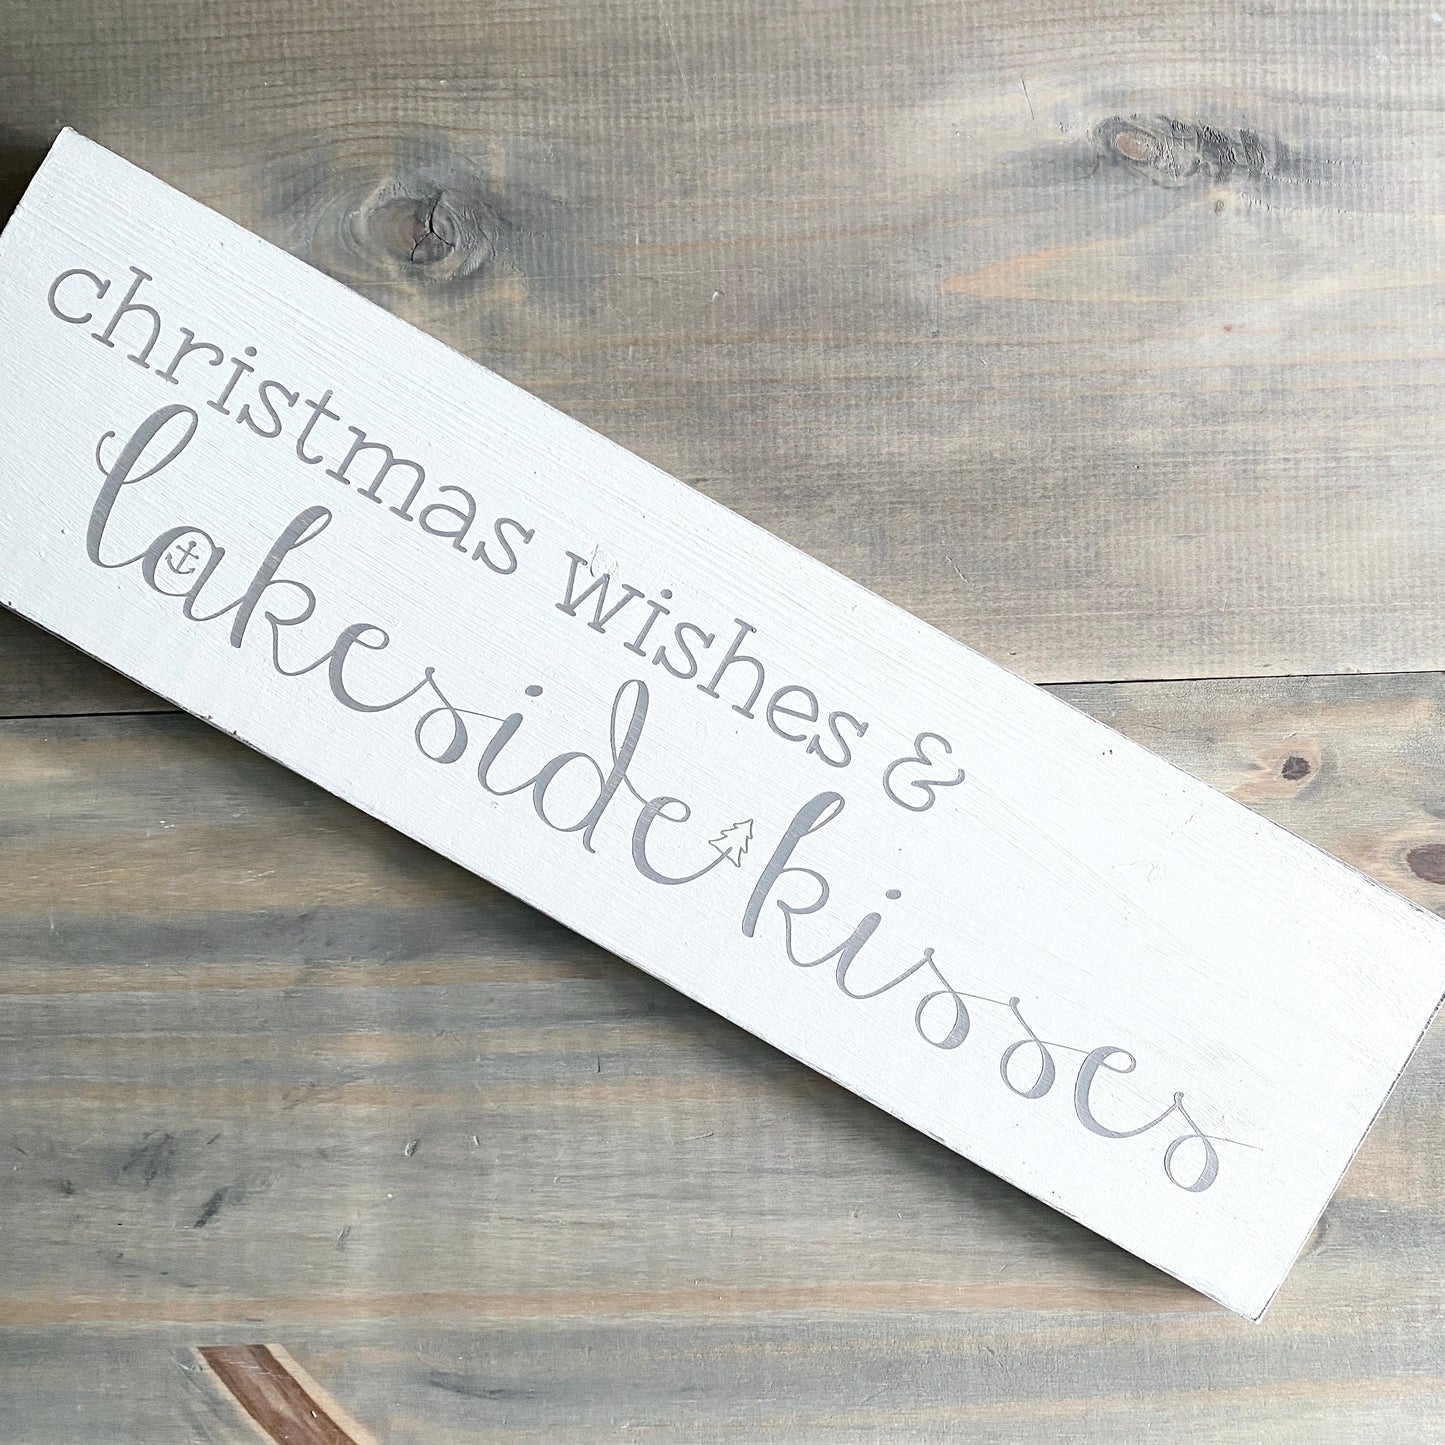 Christmas Wishes and Lakeside Kisses Sign